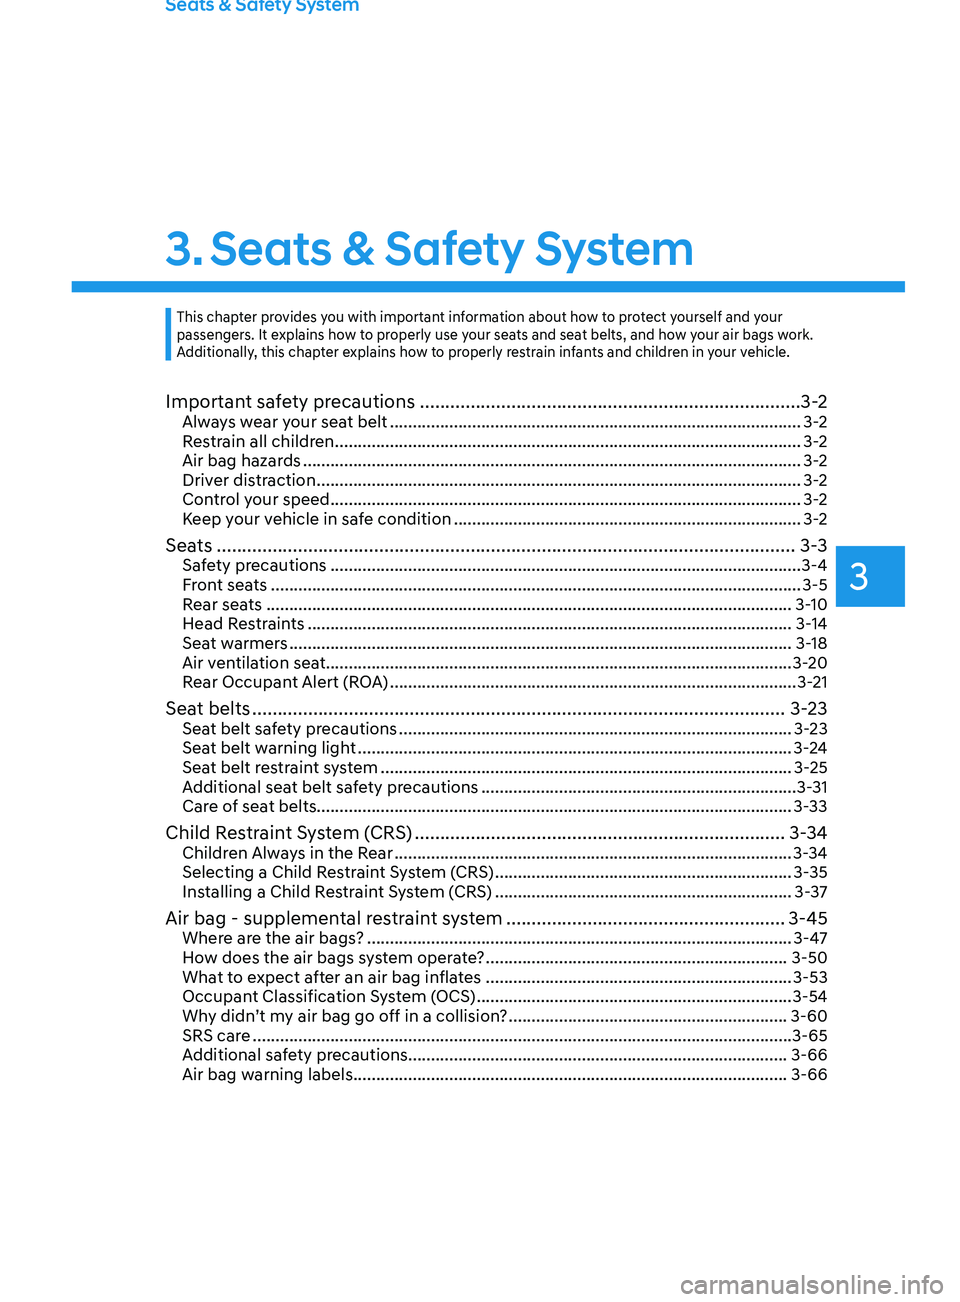 HYUNDAI SANTA FE LIMITED 2021 Owners Guide Seats & Safety System
3. Seats & Safety System
Important safety precautions ........................................................................\
... 3-2Always wear your seat belt ................